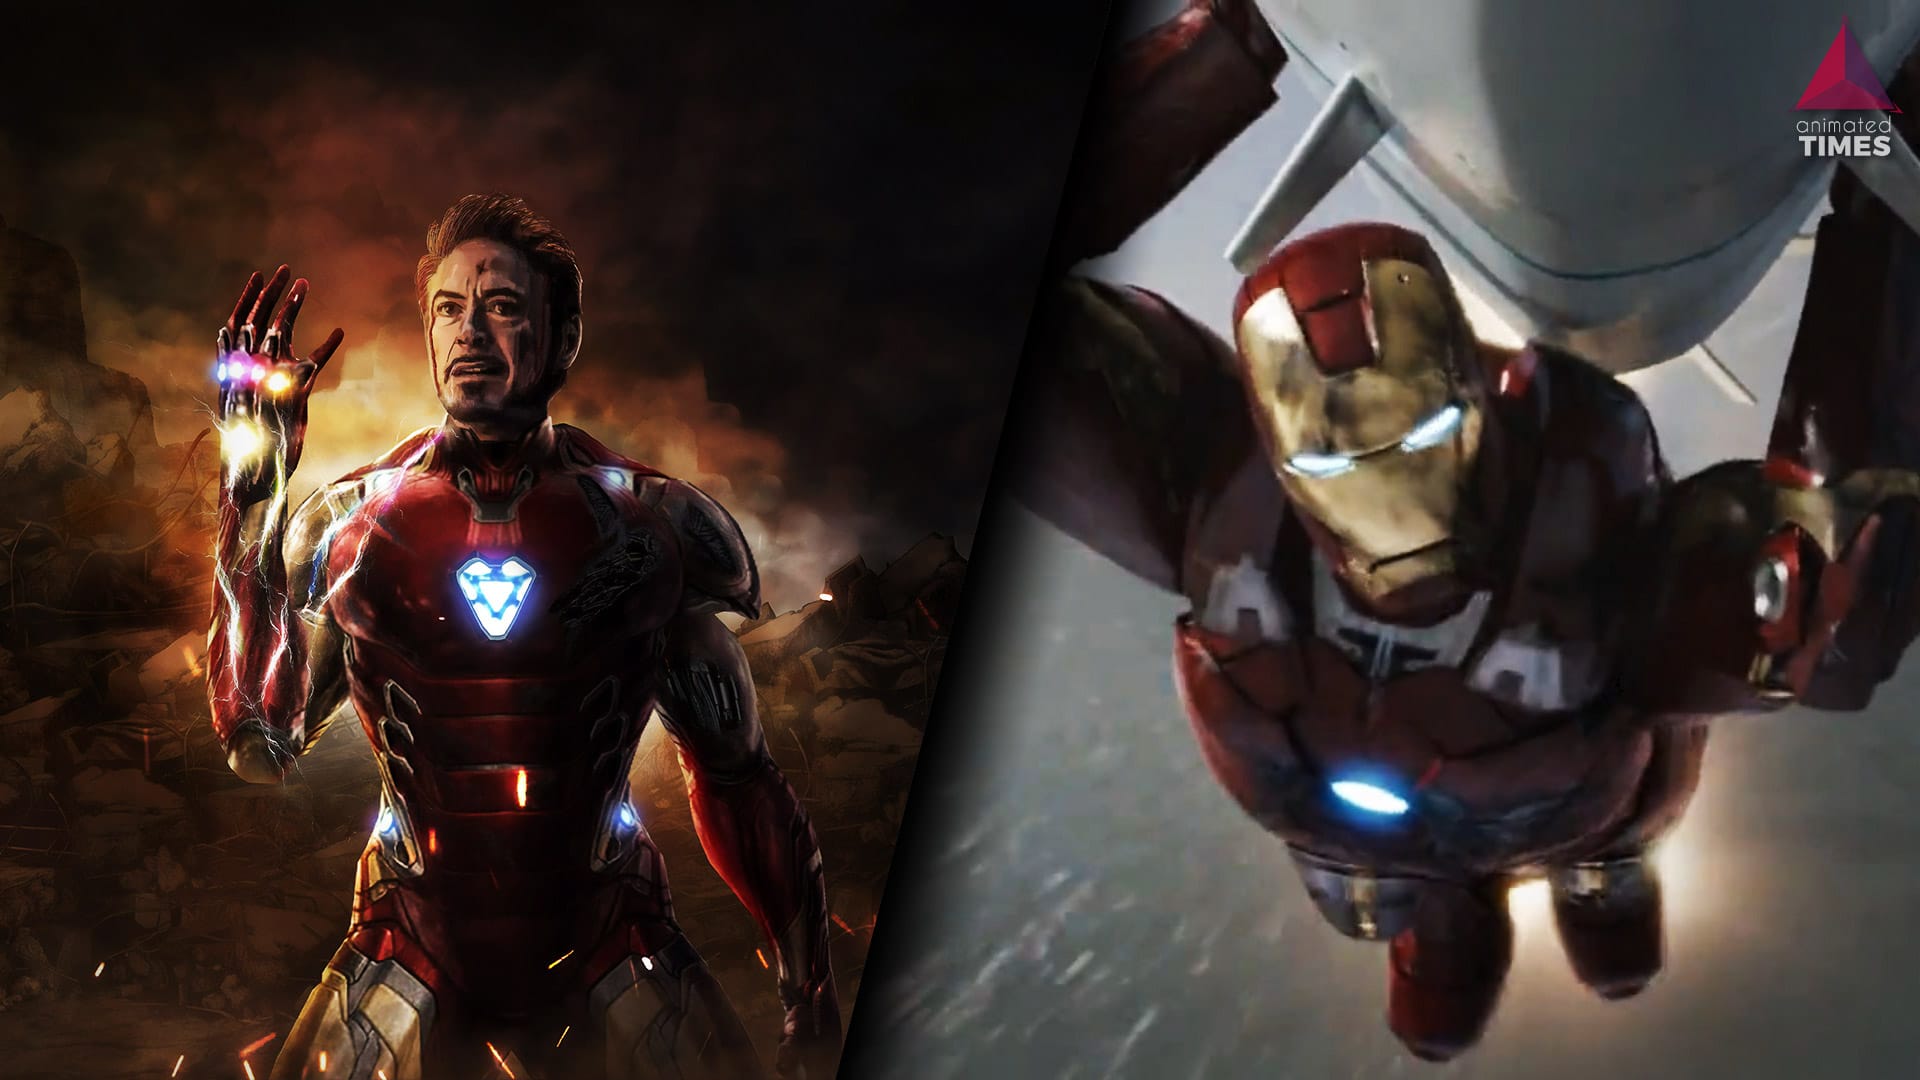 Iron Man: Why Battle of New York Caused More Agony Than His Own Abduction?